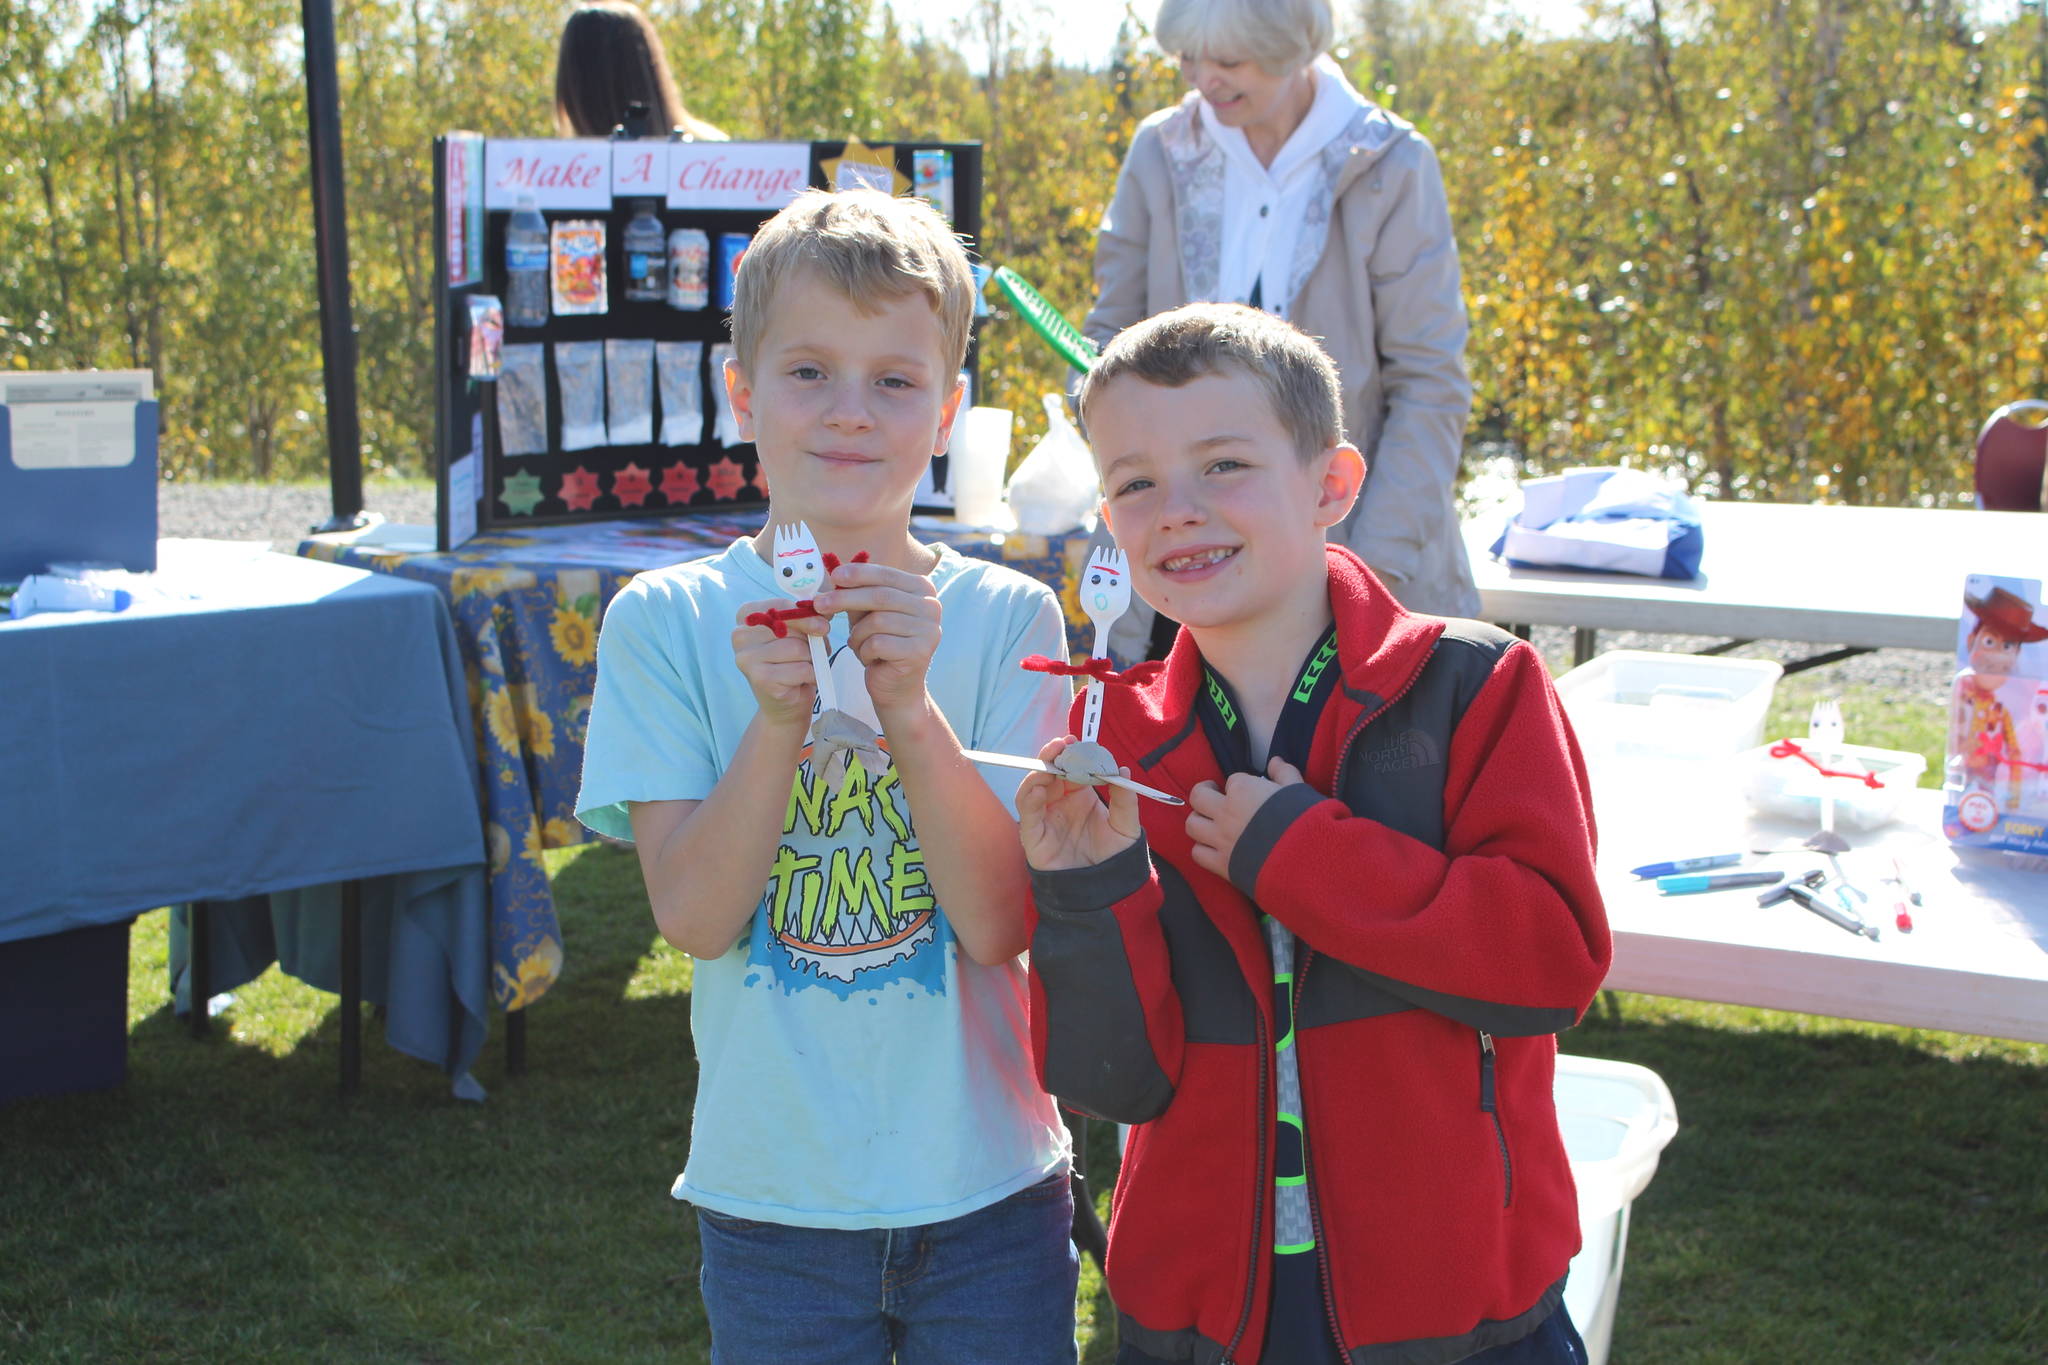 Sage Carricot, left, and Wade Alvore, right, show off their fork figures at the Harvest Moon Local Food Festival at Soldotna Creek Park on Sept. 14, 2019. (Photo by Brian Mazurek/Peninsula Clarion)